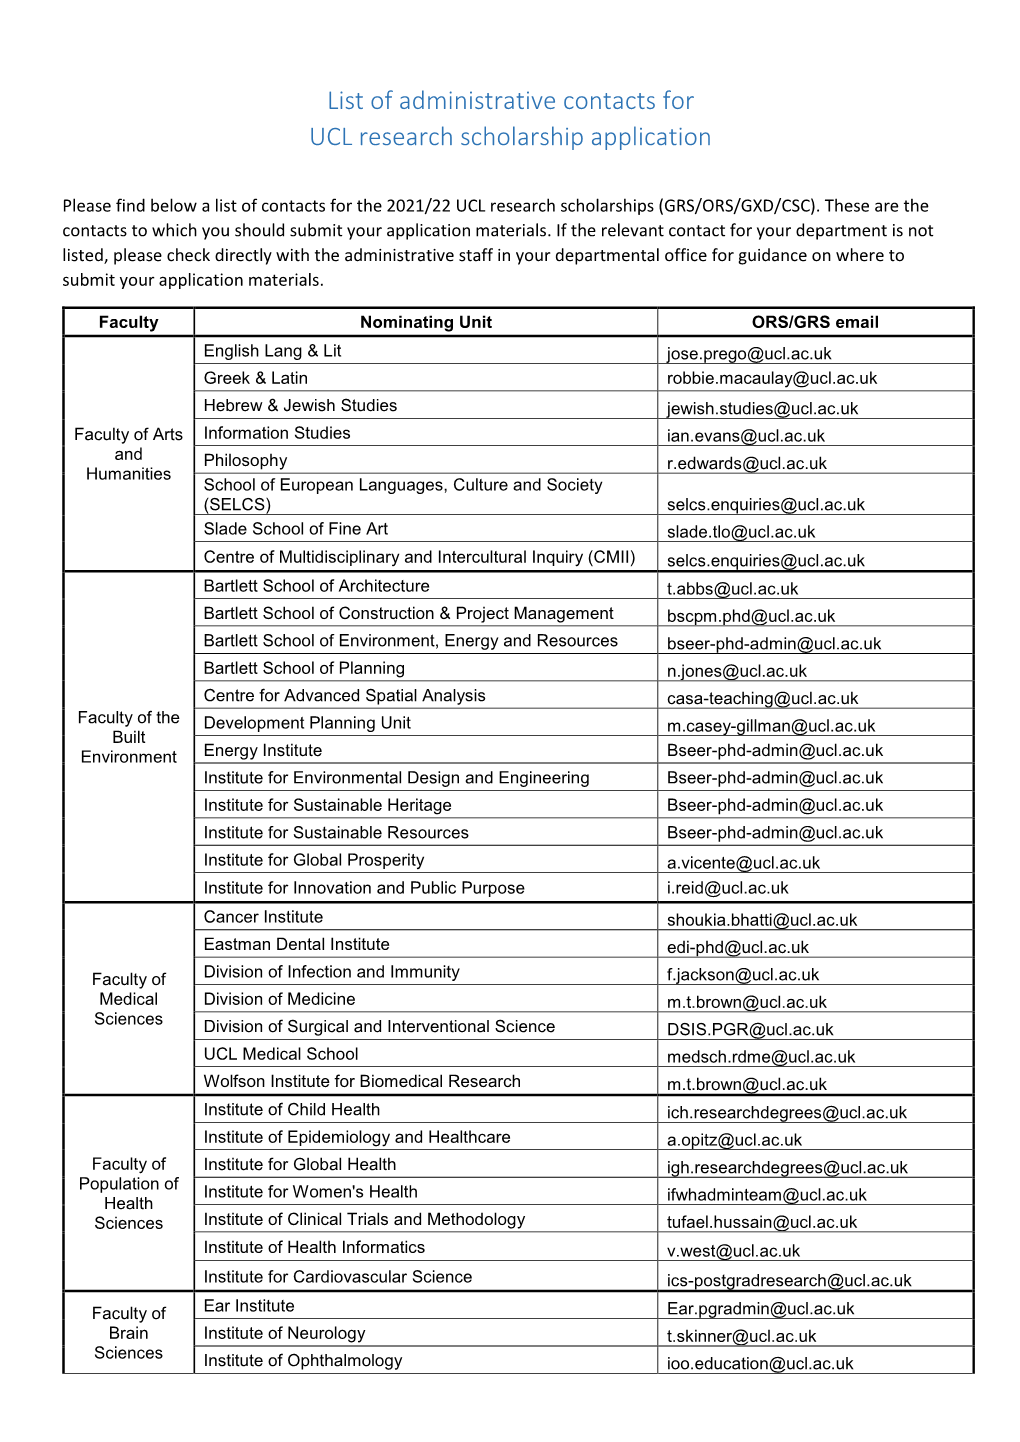 List of Administrative Contacts for UCL Research Scholarship Application